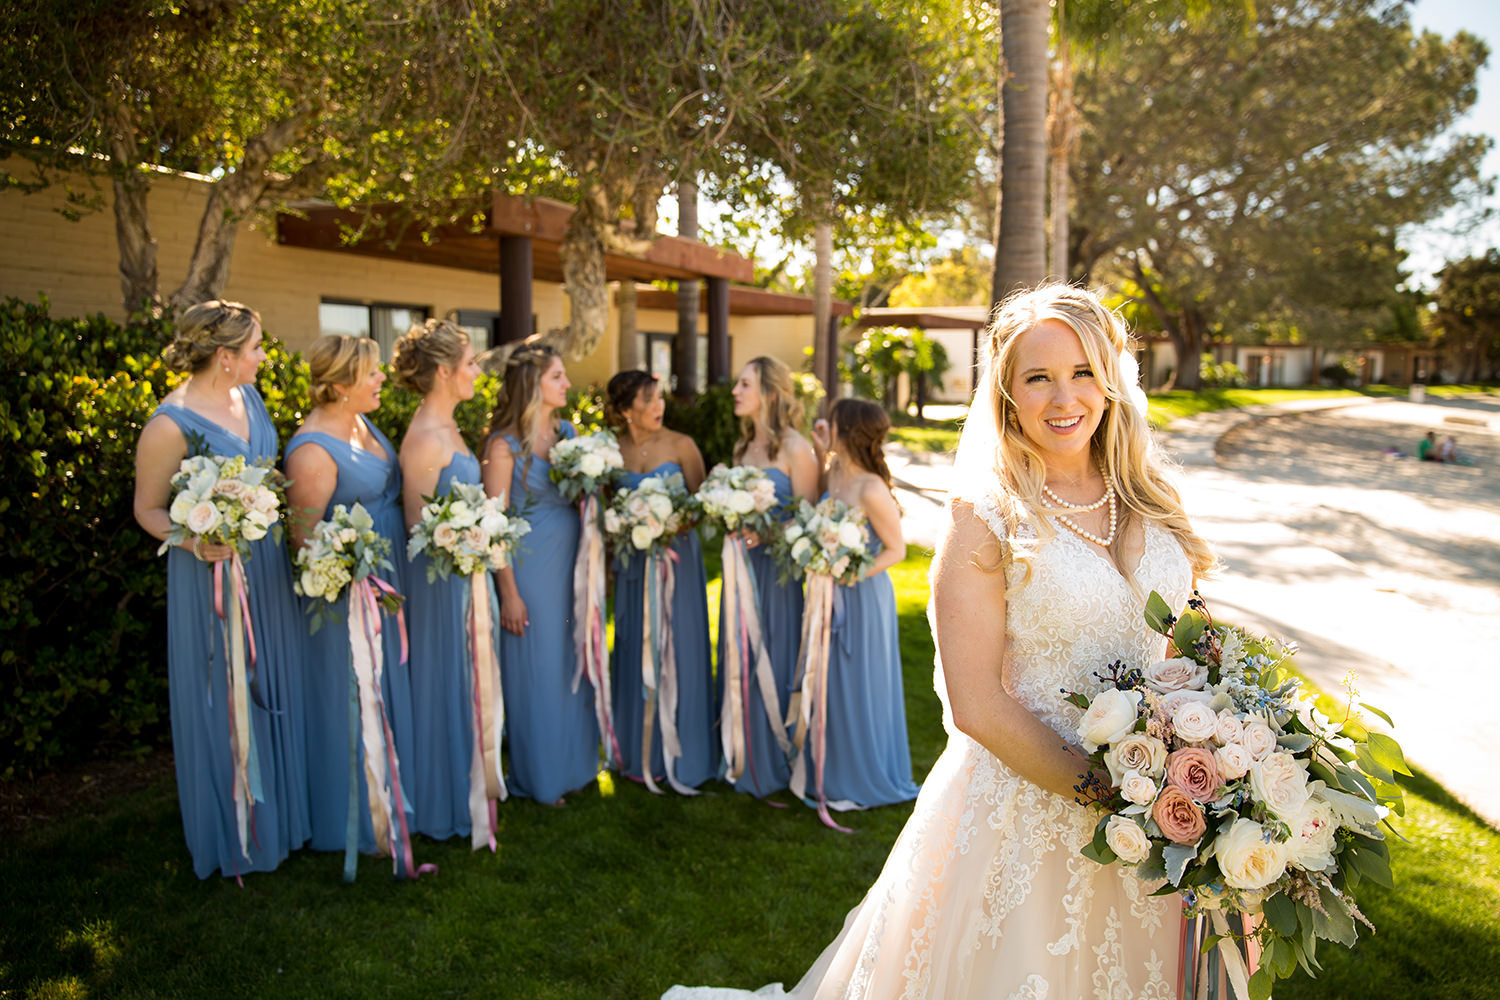 A bride and her bridesmaids | Creative group portrait ideas